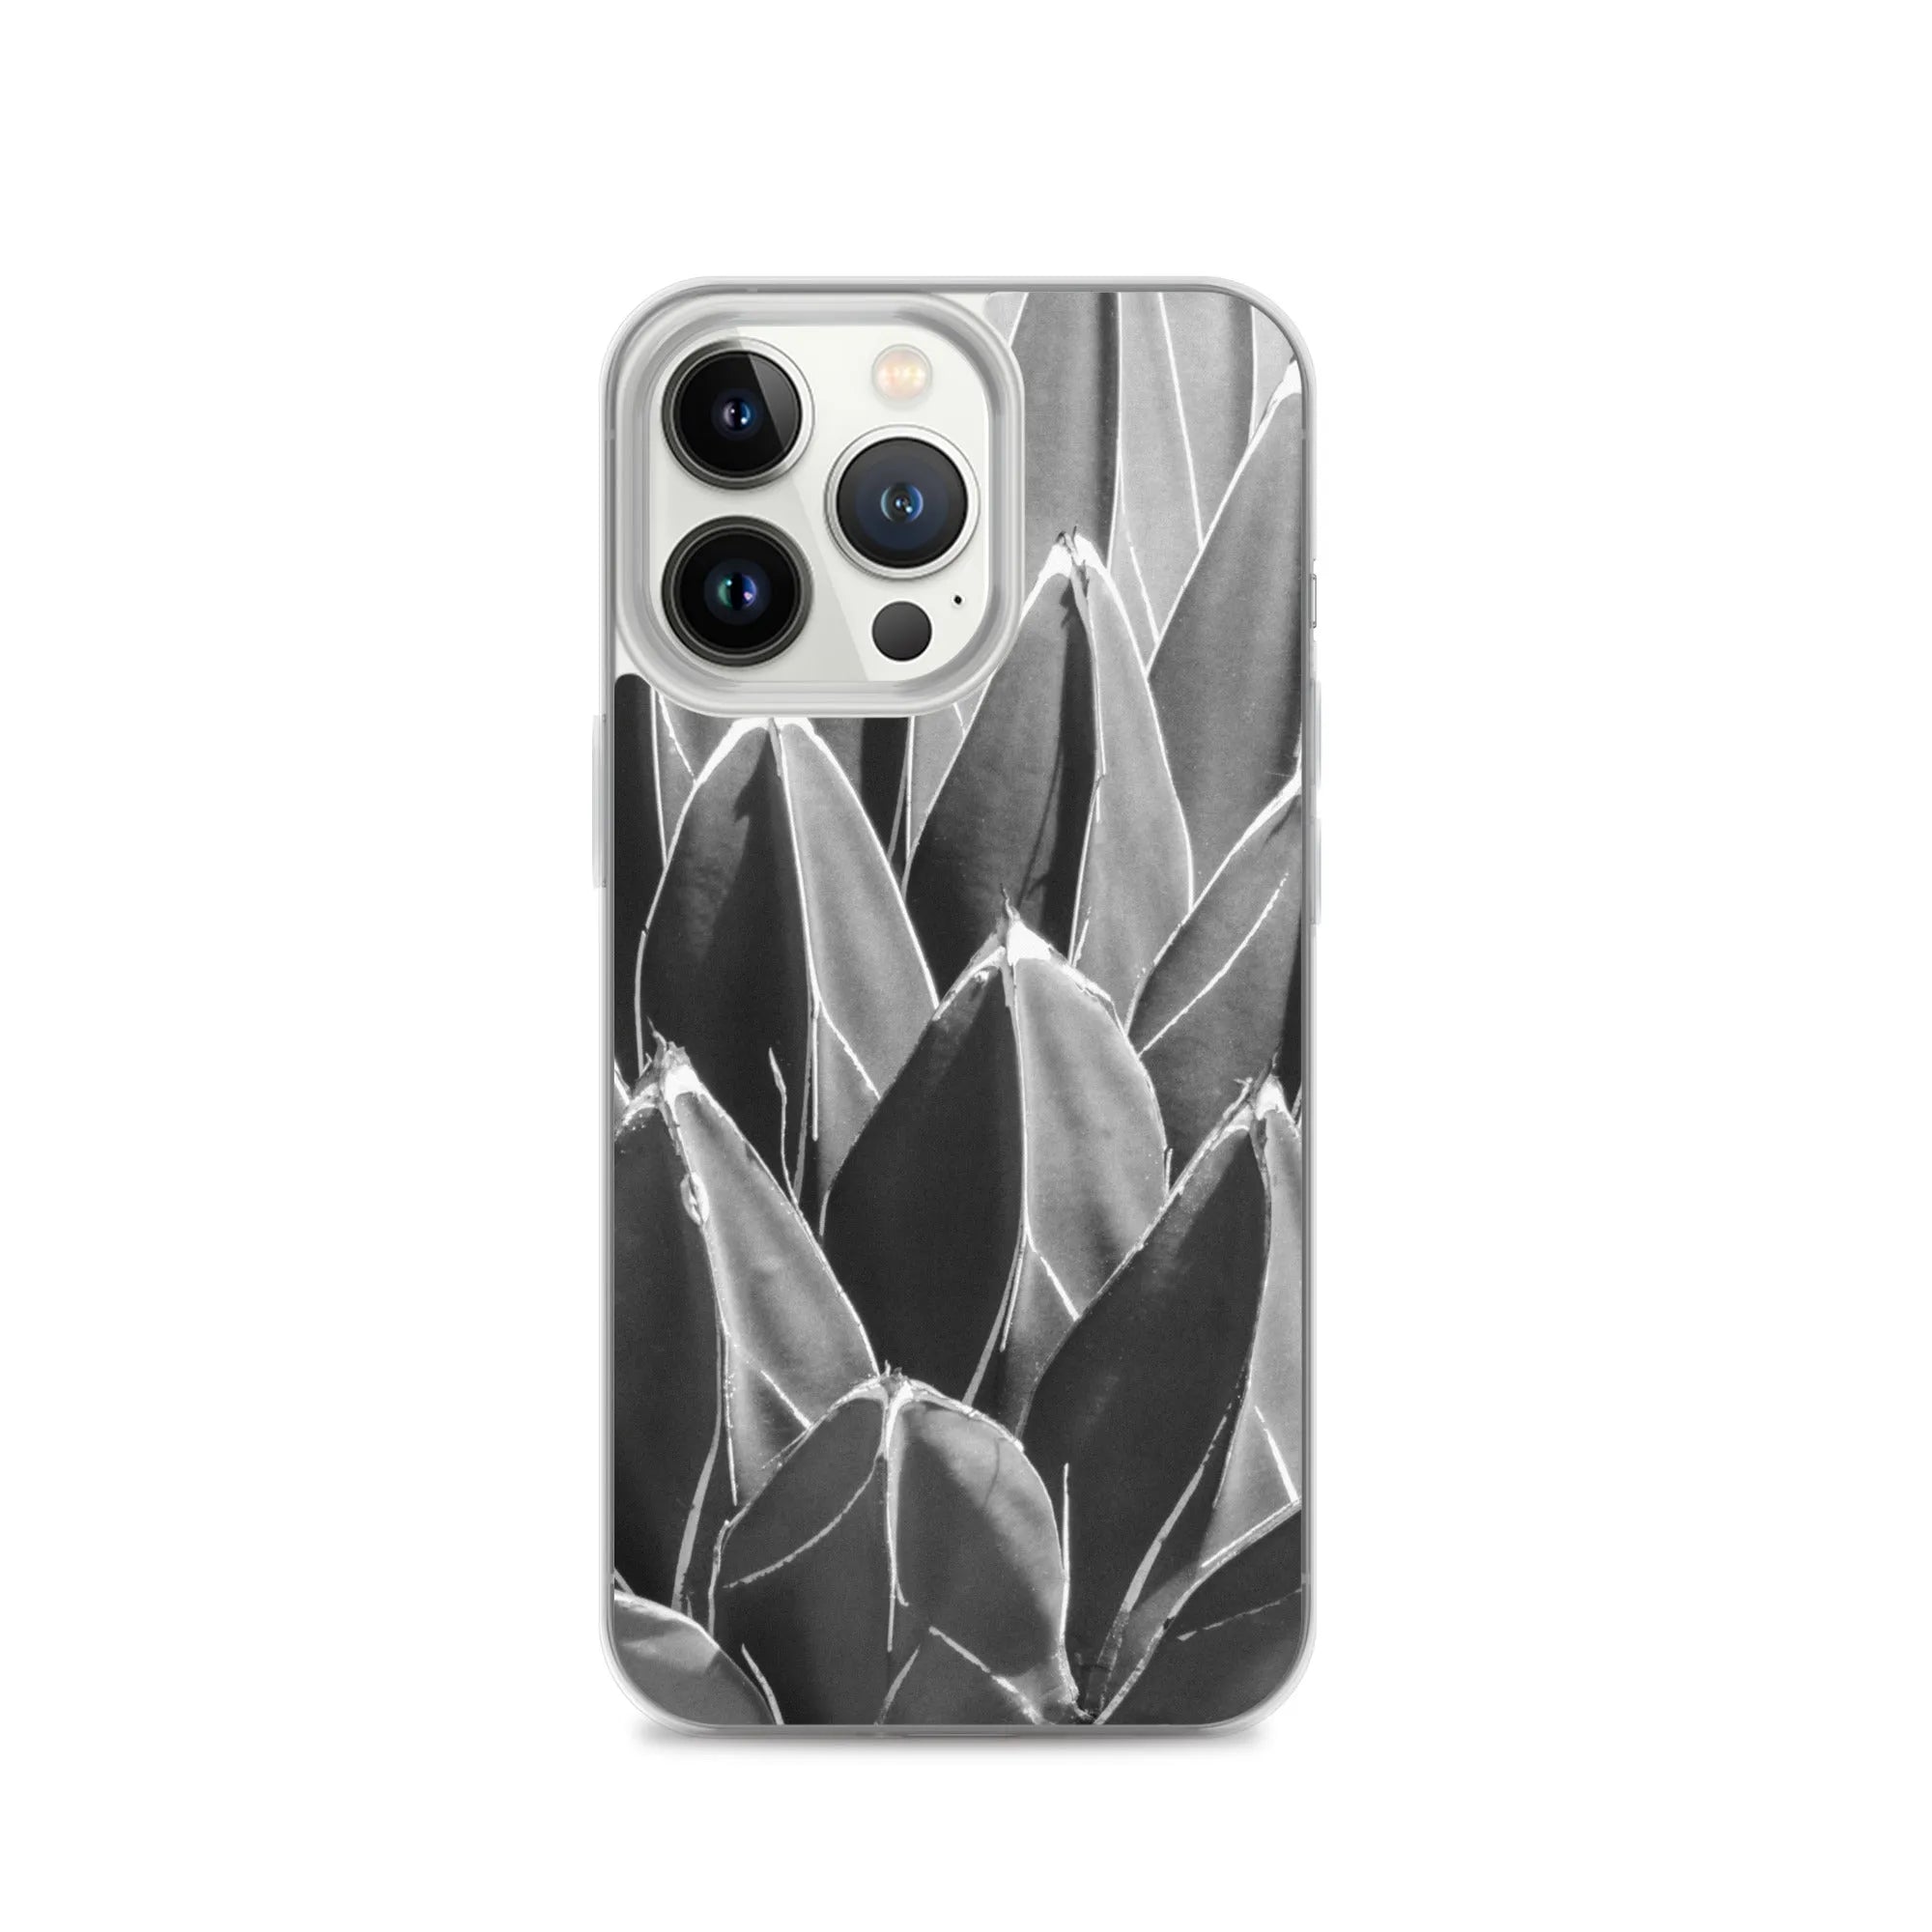 Decked Out Botanical Art Iphone Case - black And White - Iphone 13 Pro - Mobile Phone Cases - Aesthetic Art